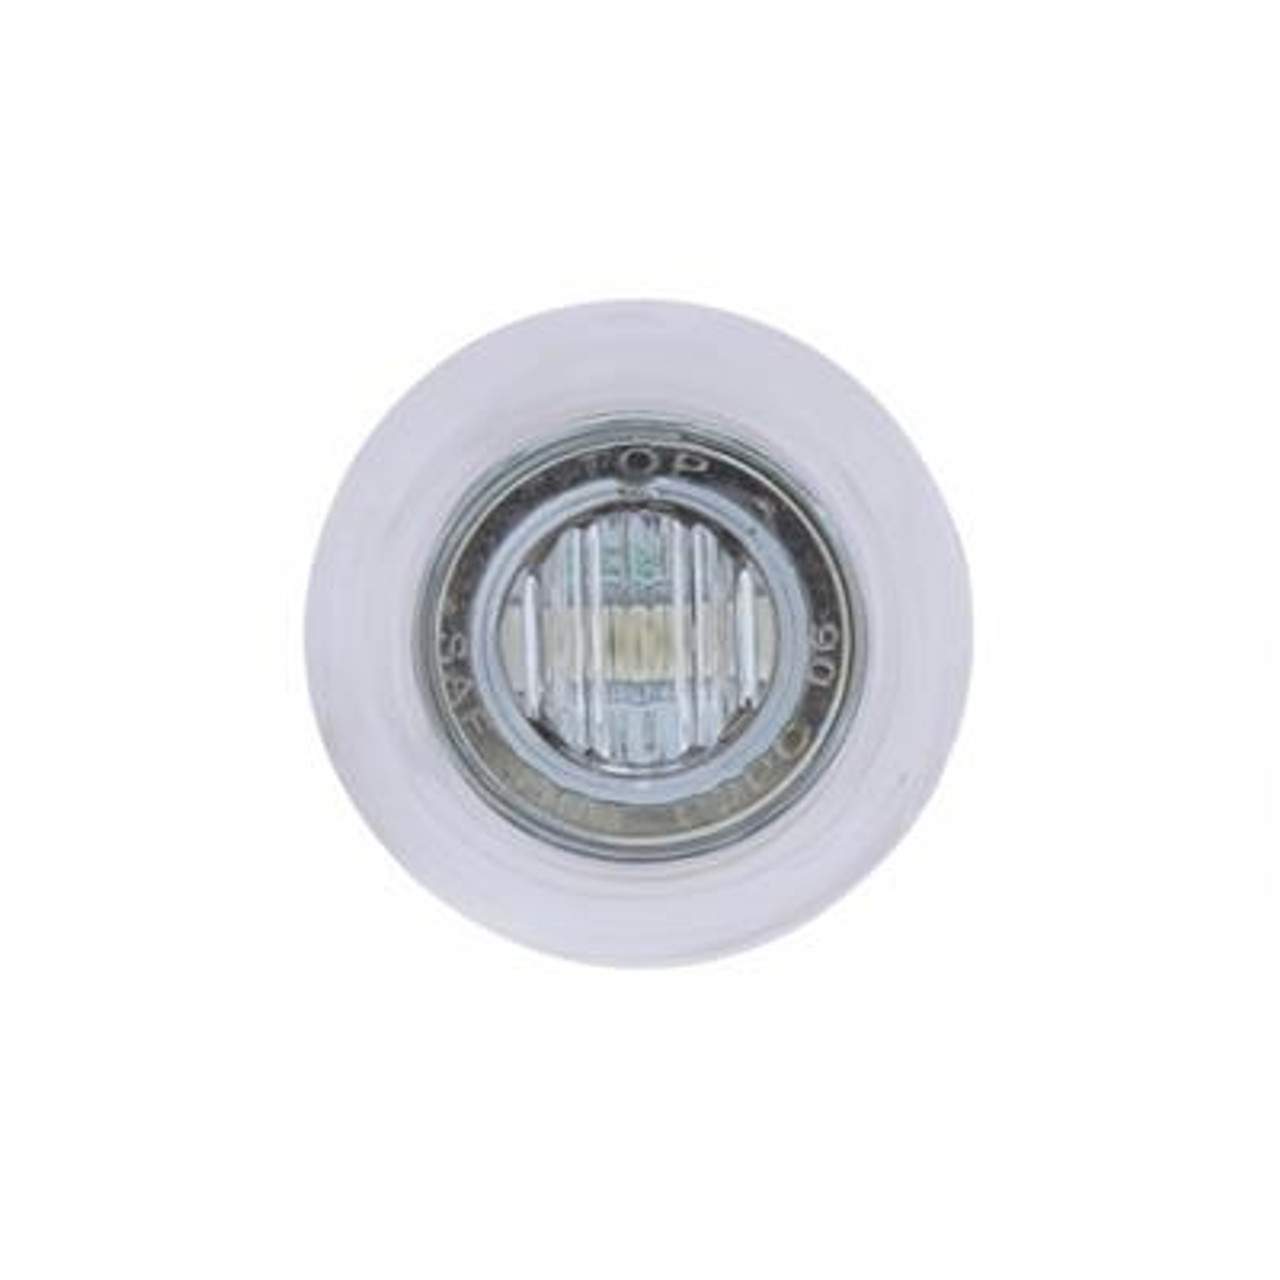 3 LED Dual Function Mini Light With Bezel (Clearance/Marker) - Red LED/Clear Lens